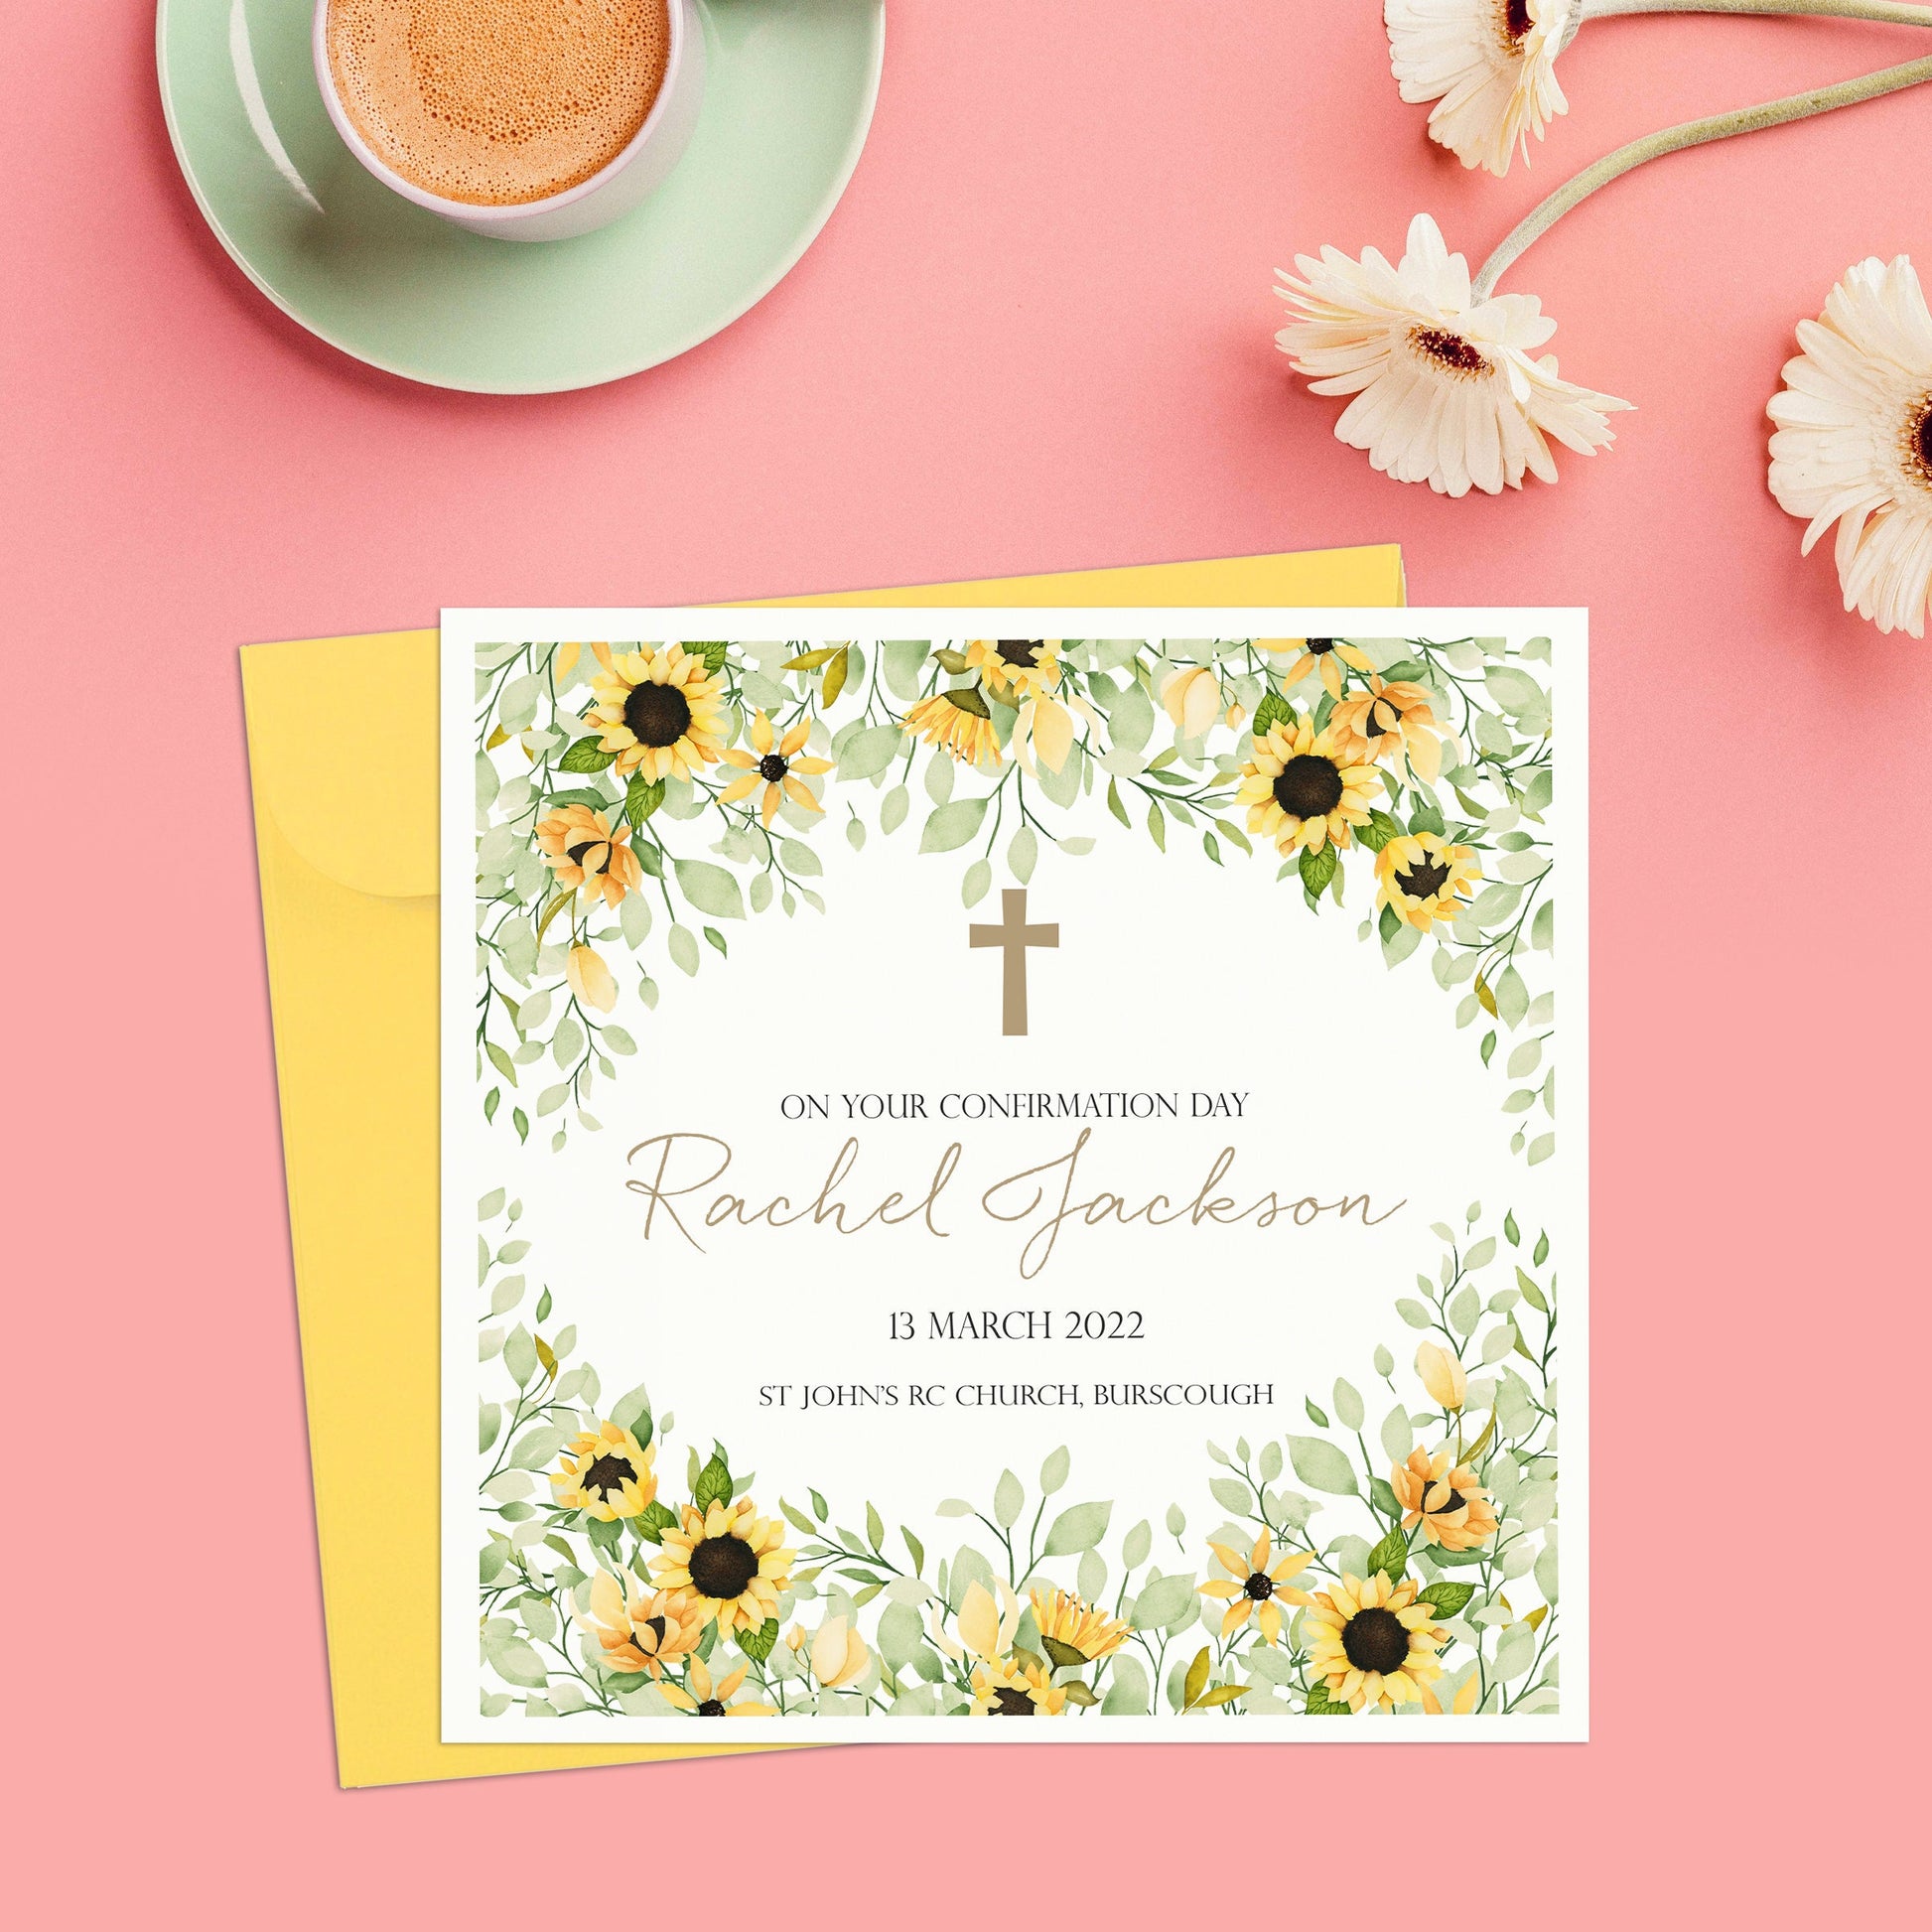 Personalised Sunflowers Confirmation Card, Niece Confirmation Card, Daughter Confirmation, Granddaughter Confirmation, Religious Celebration